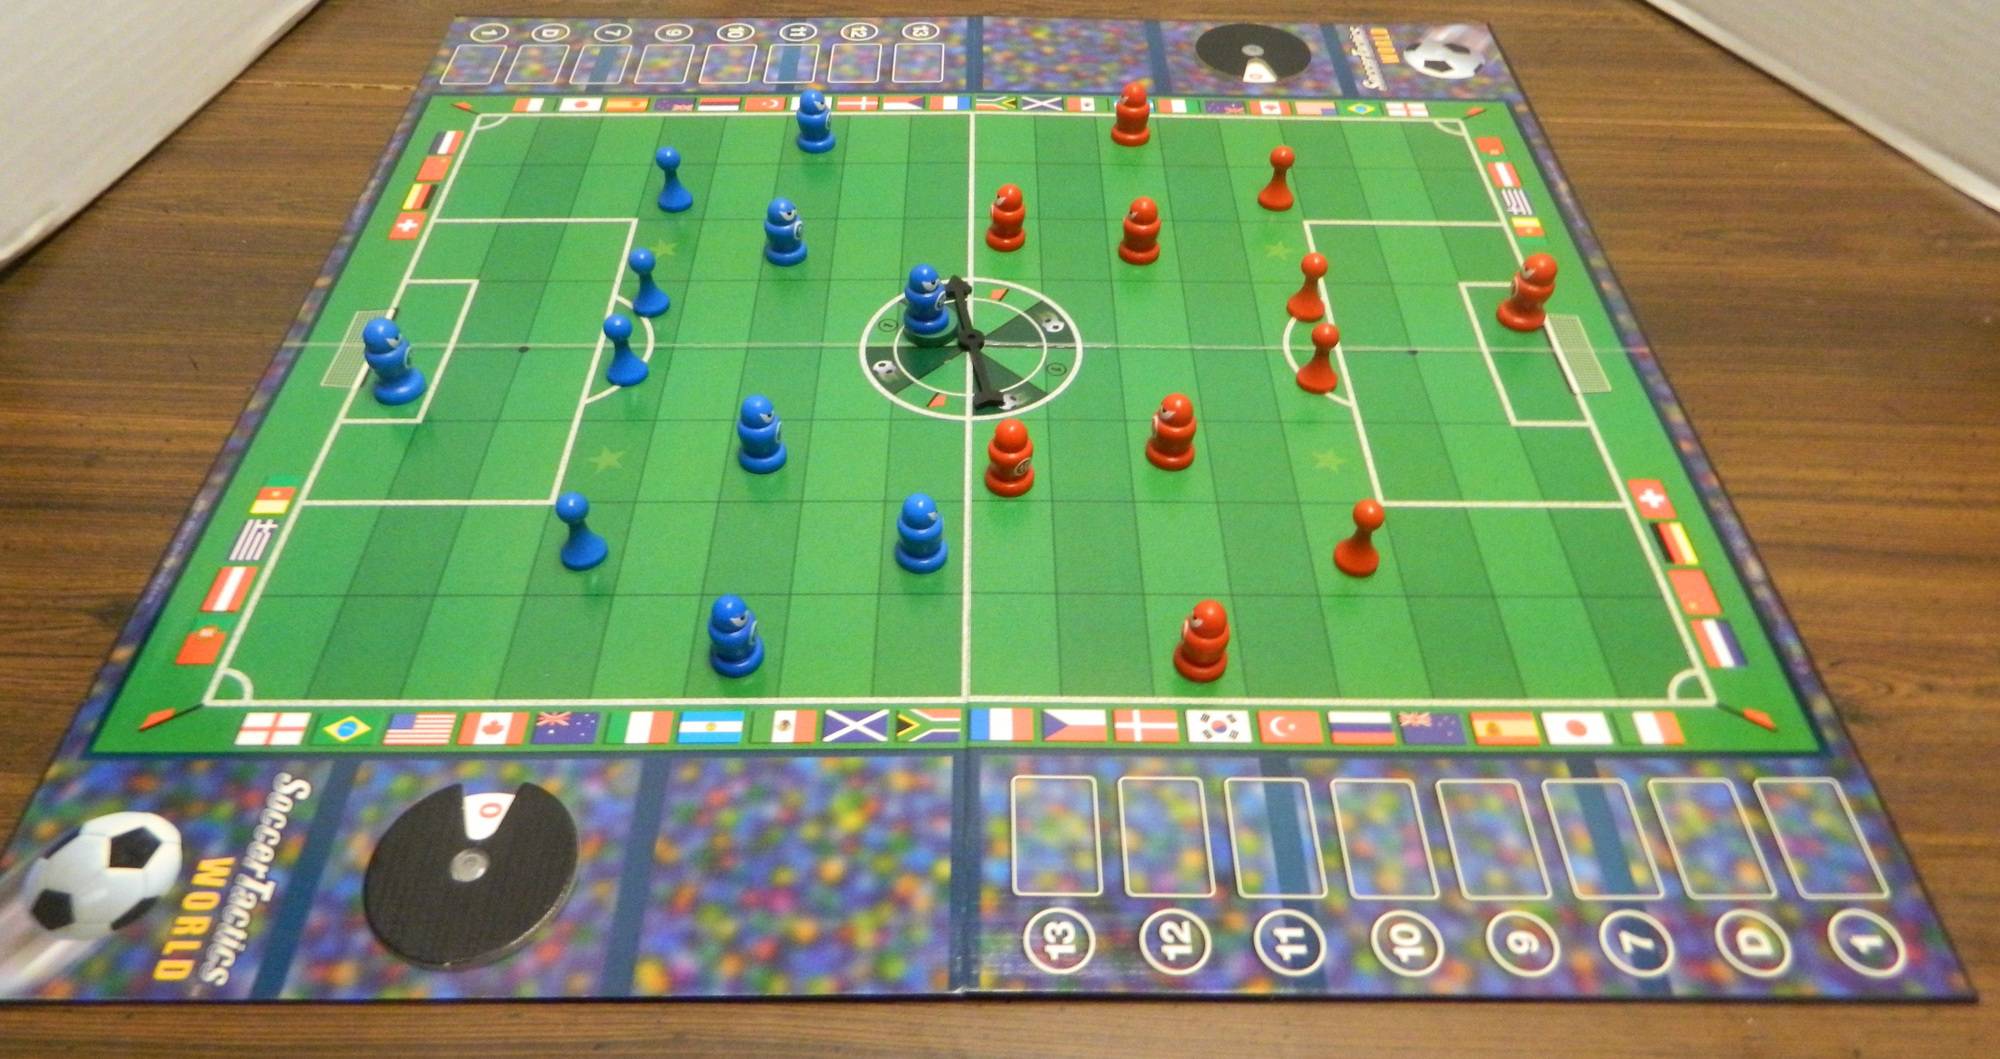 Soccer Tactics World Board Game Review and Rules | Geeky Hobbies